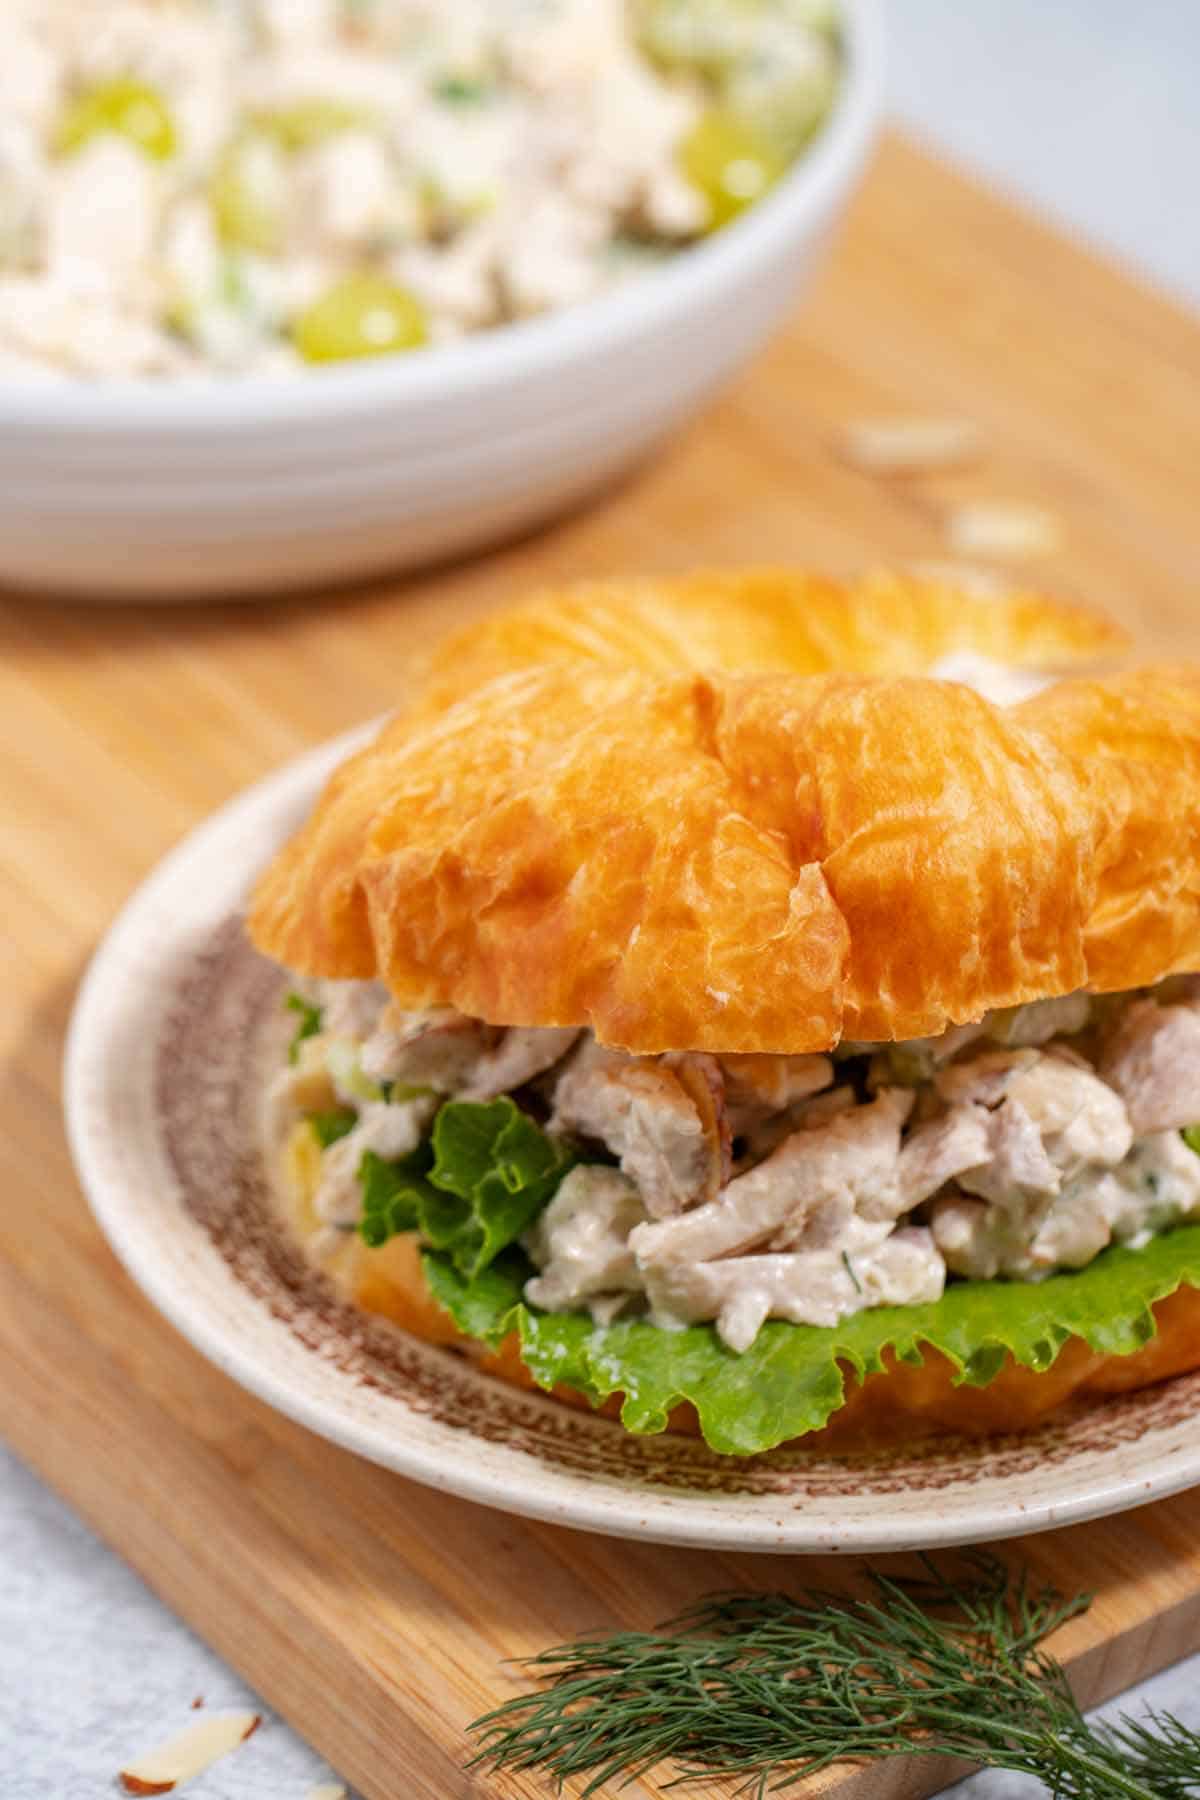 Chicken salad sandwich on a plate with a serving bowl of the salad in the background.